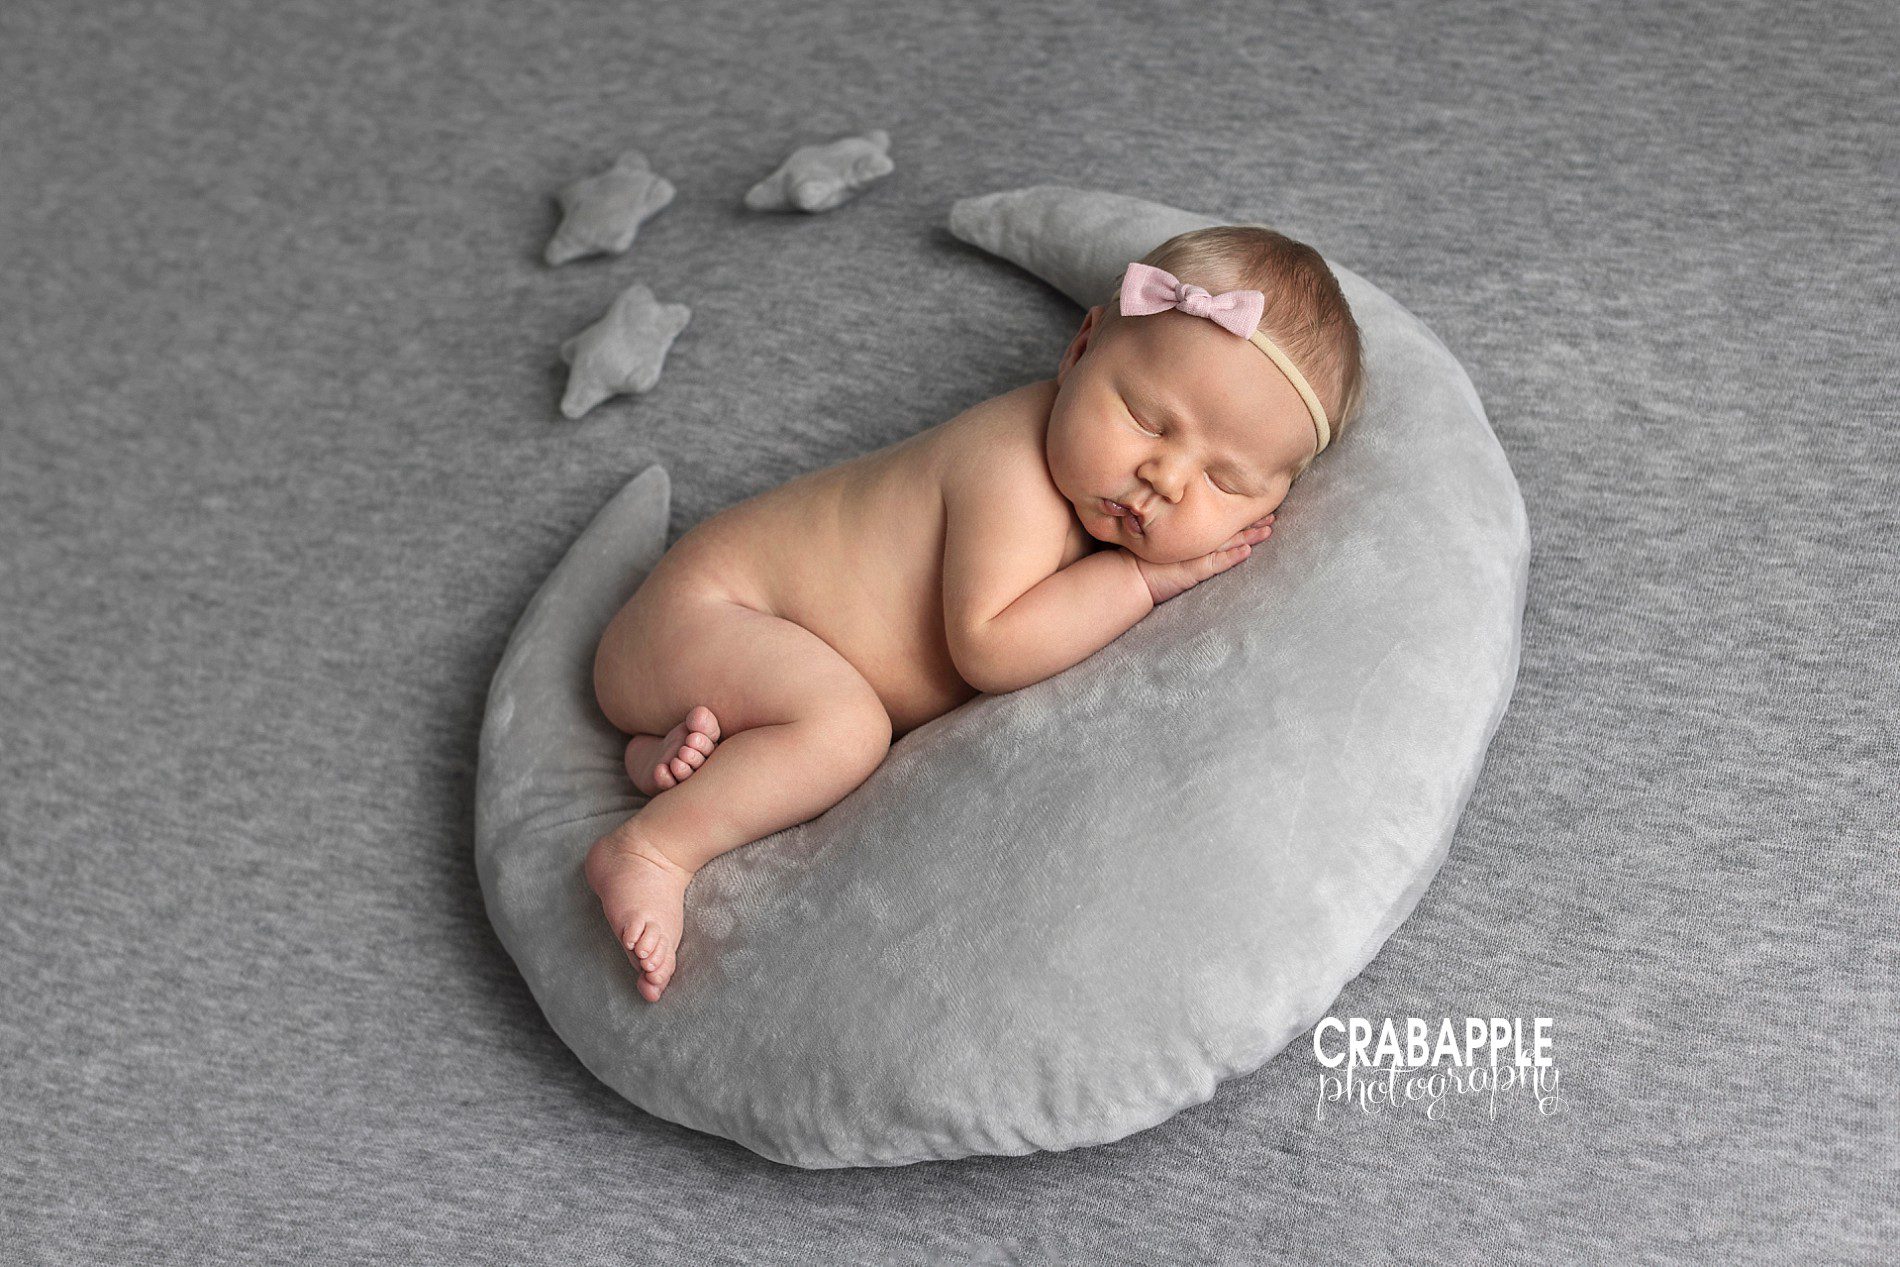 Newborn photo using a crescent moon shaped pillow and small star pillows.